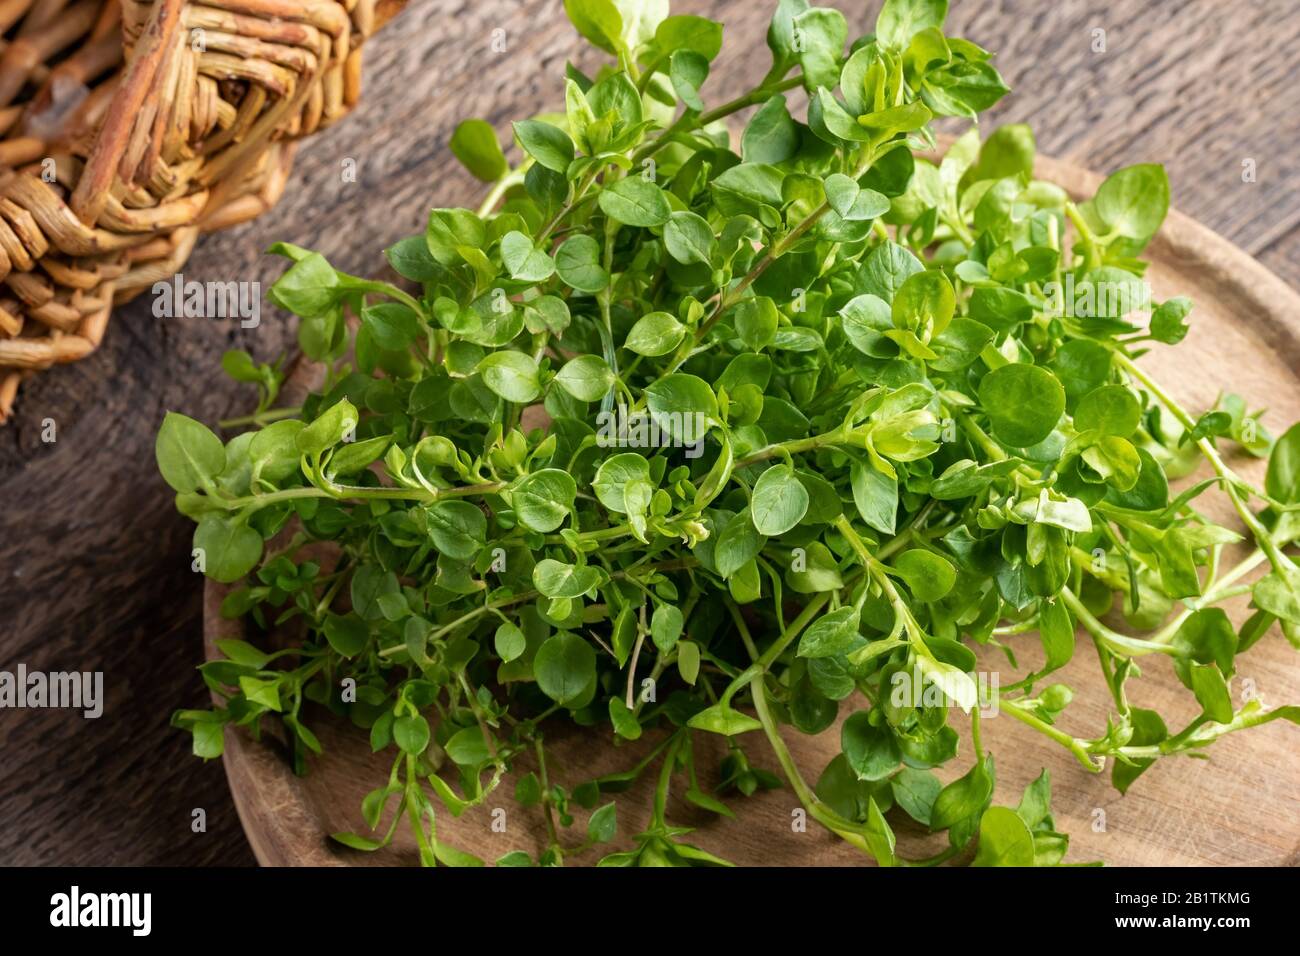 Young leaves of chickweed or Stellaria media - a wild edible plant collected in early spring Stock Photo